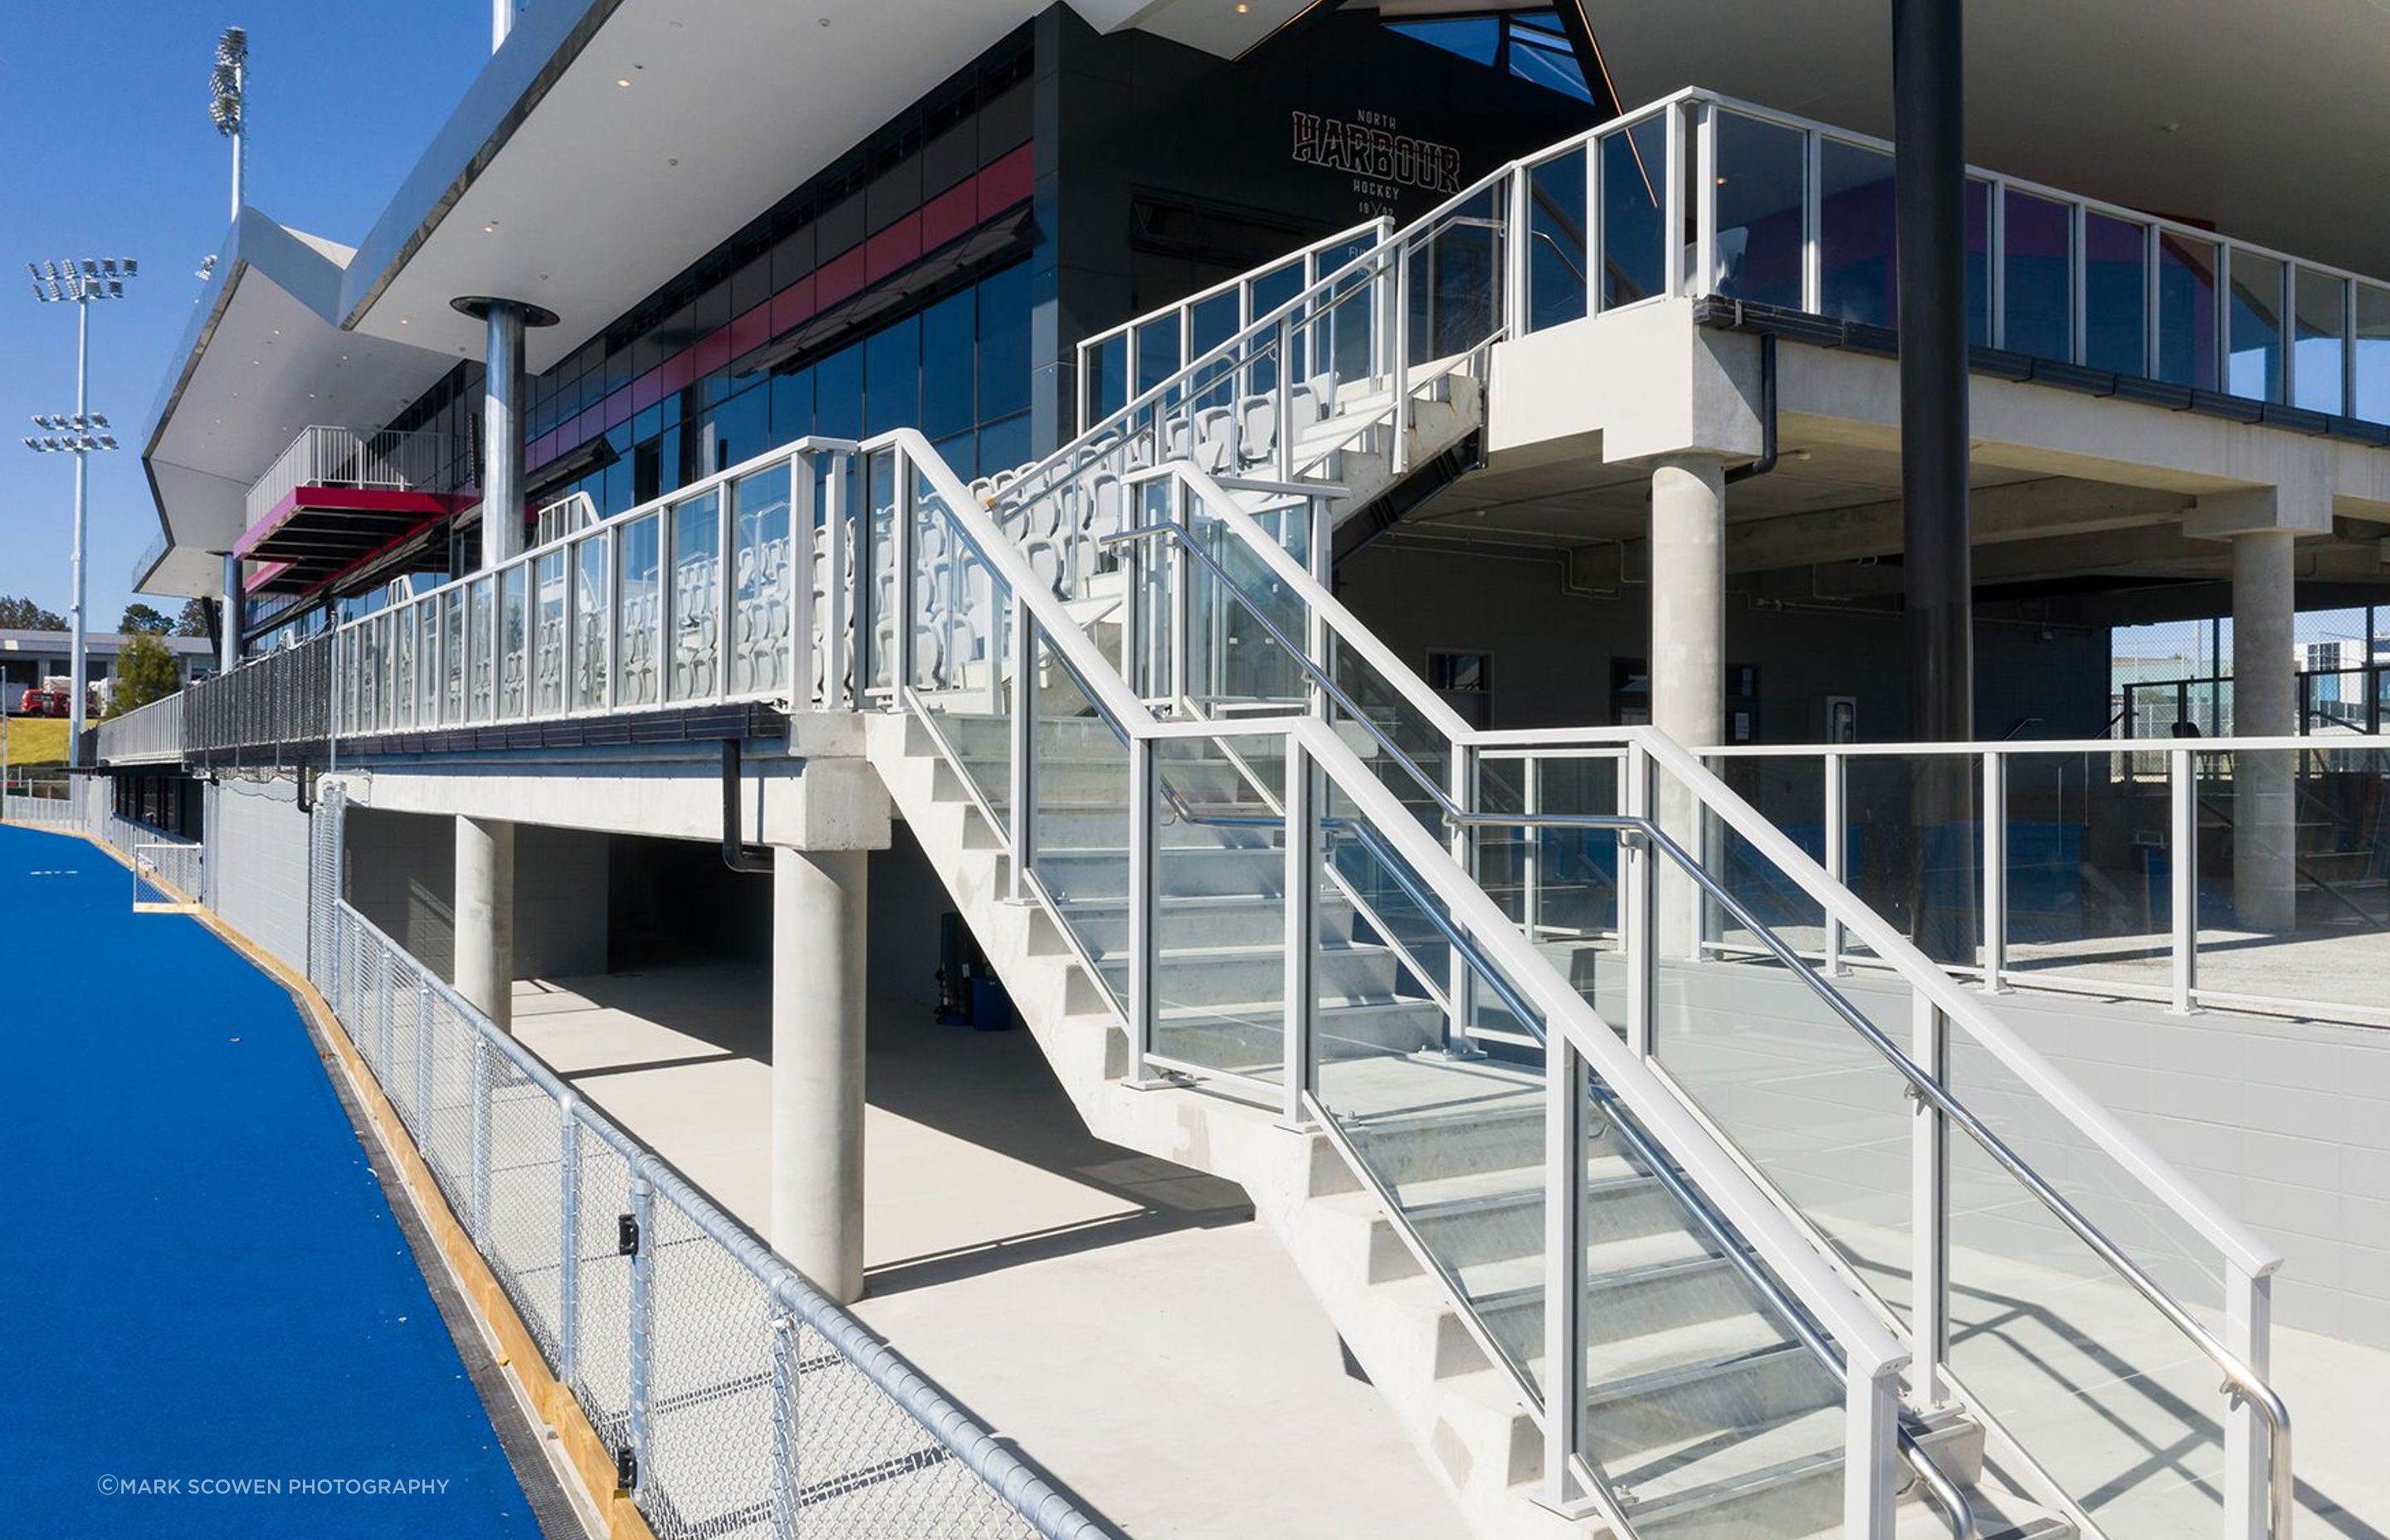 The company also installed stainless steel handicap-accessible handrails and handicap-assist hoops to the stairways.